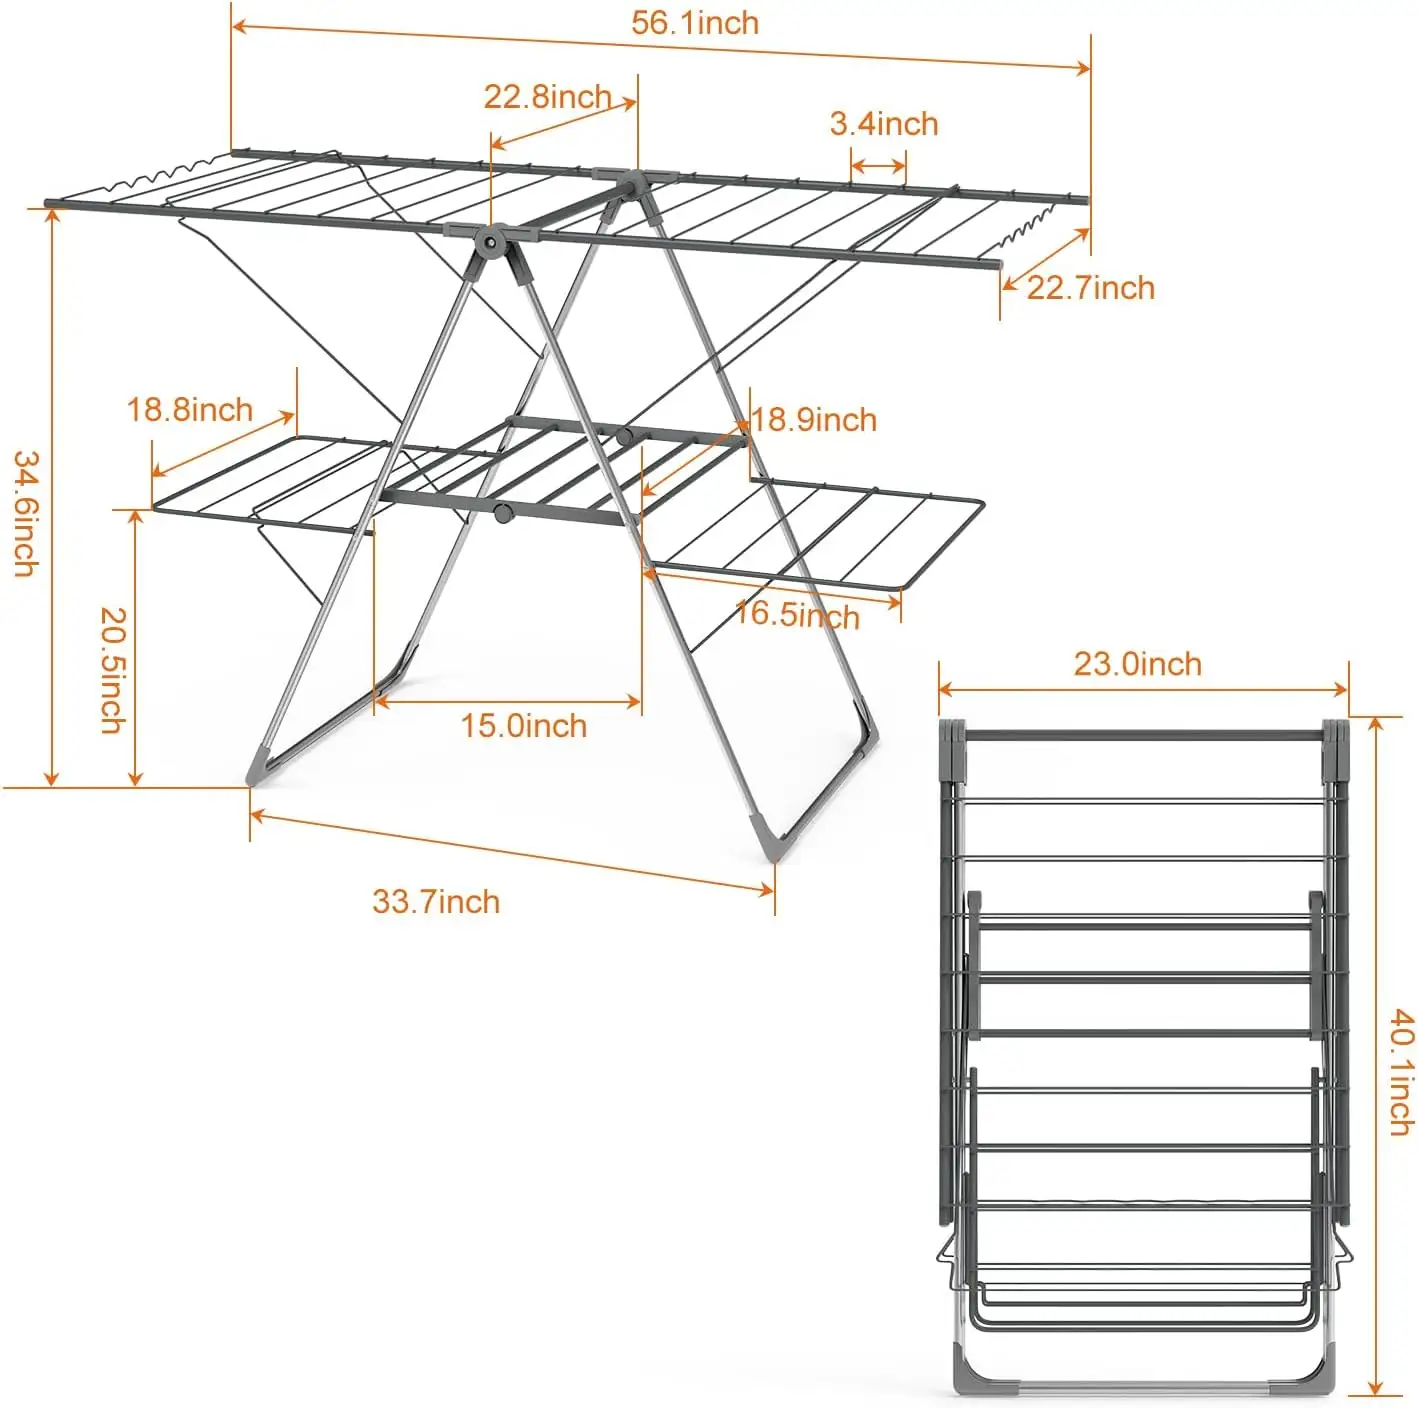 Foldable Large Laundry Drying Rack Collapsible Stainless Steel Drying Rack Clothing Indoor Outdoor Clothes Drying Rack